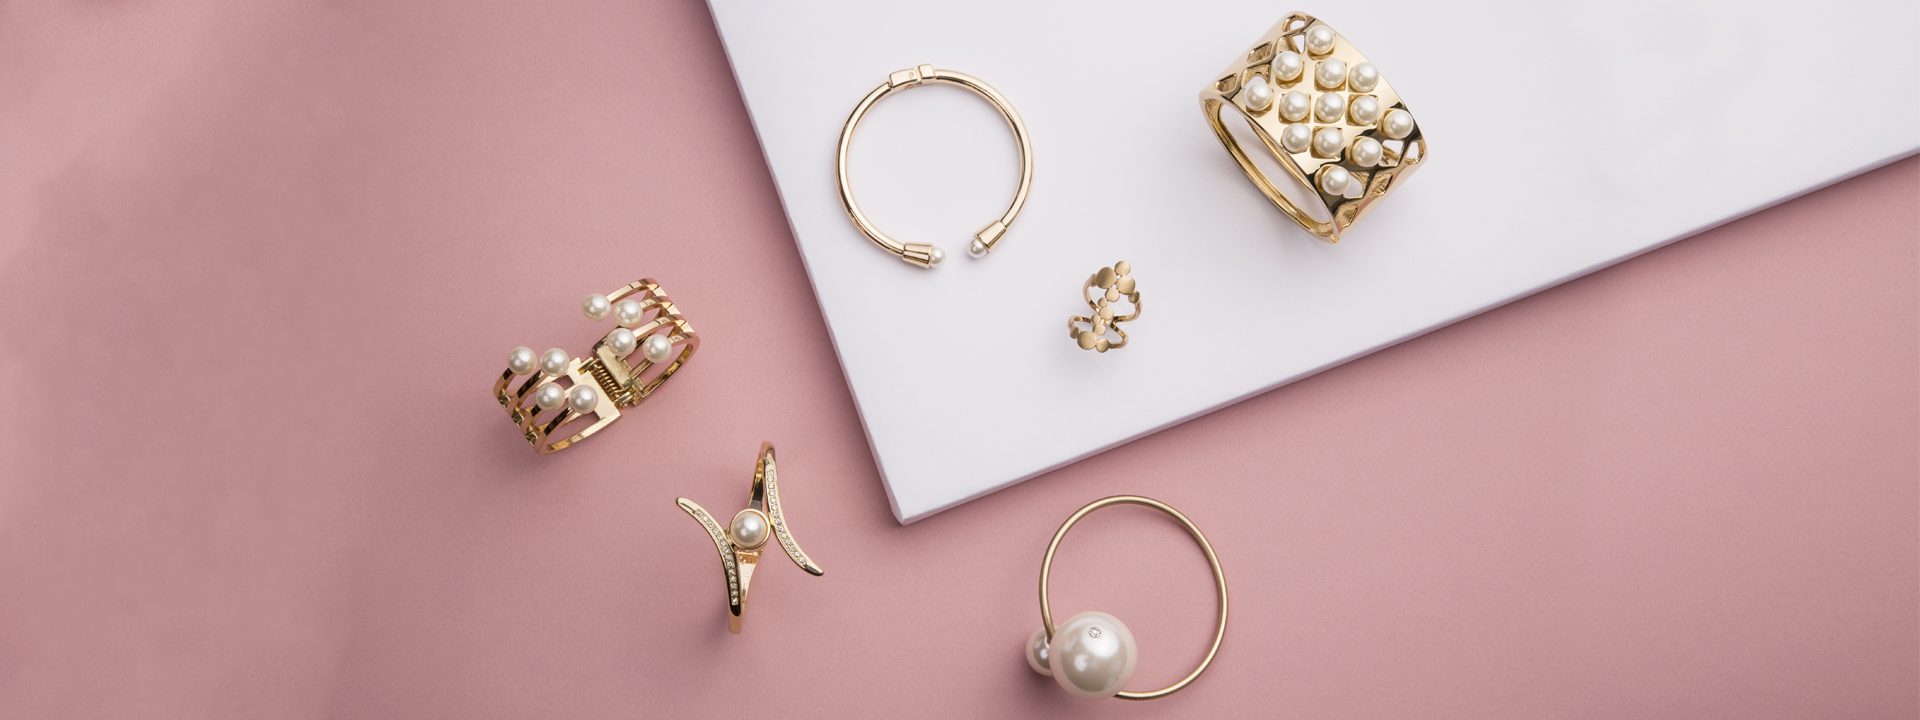 Various dainty yellow gold jewelry pieces on a pink background.